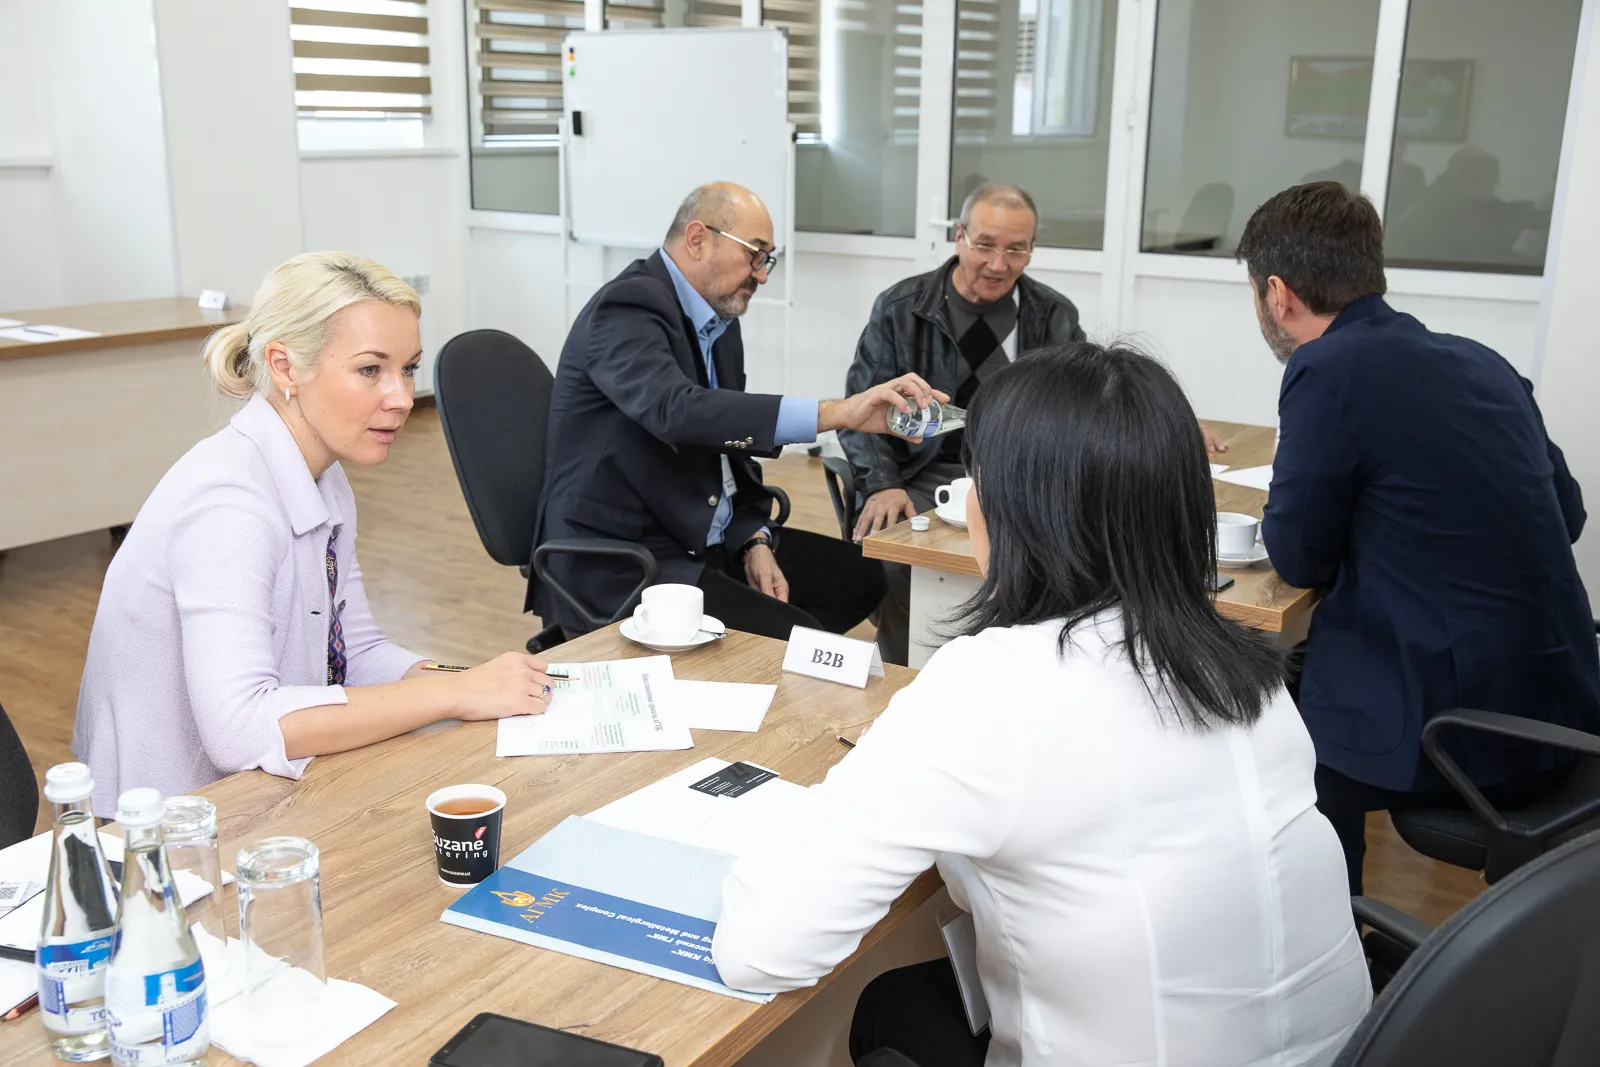 Group of people sitting on desks in a business meeting